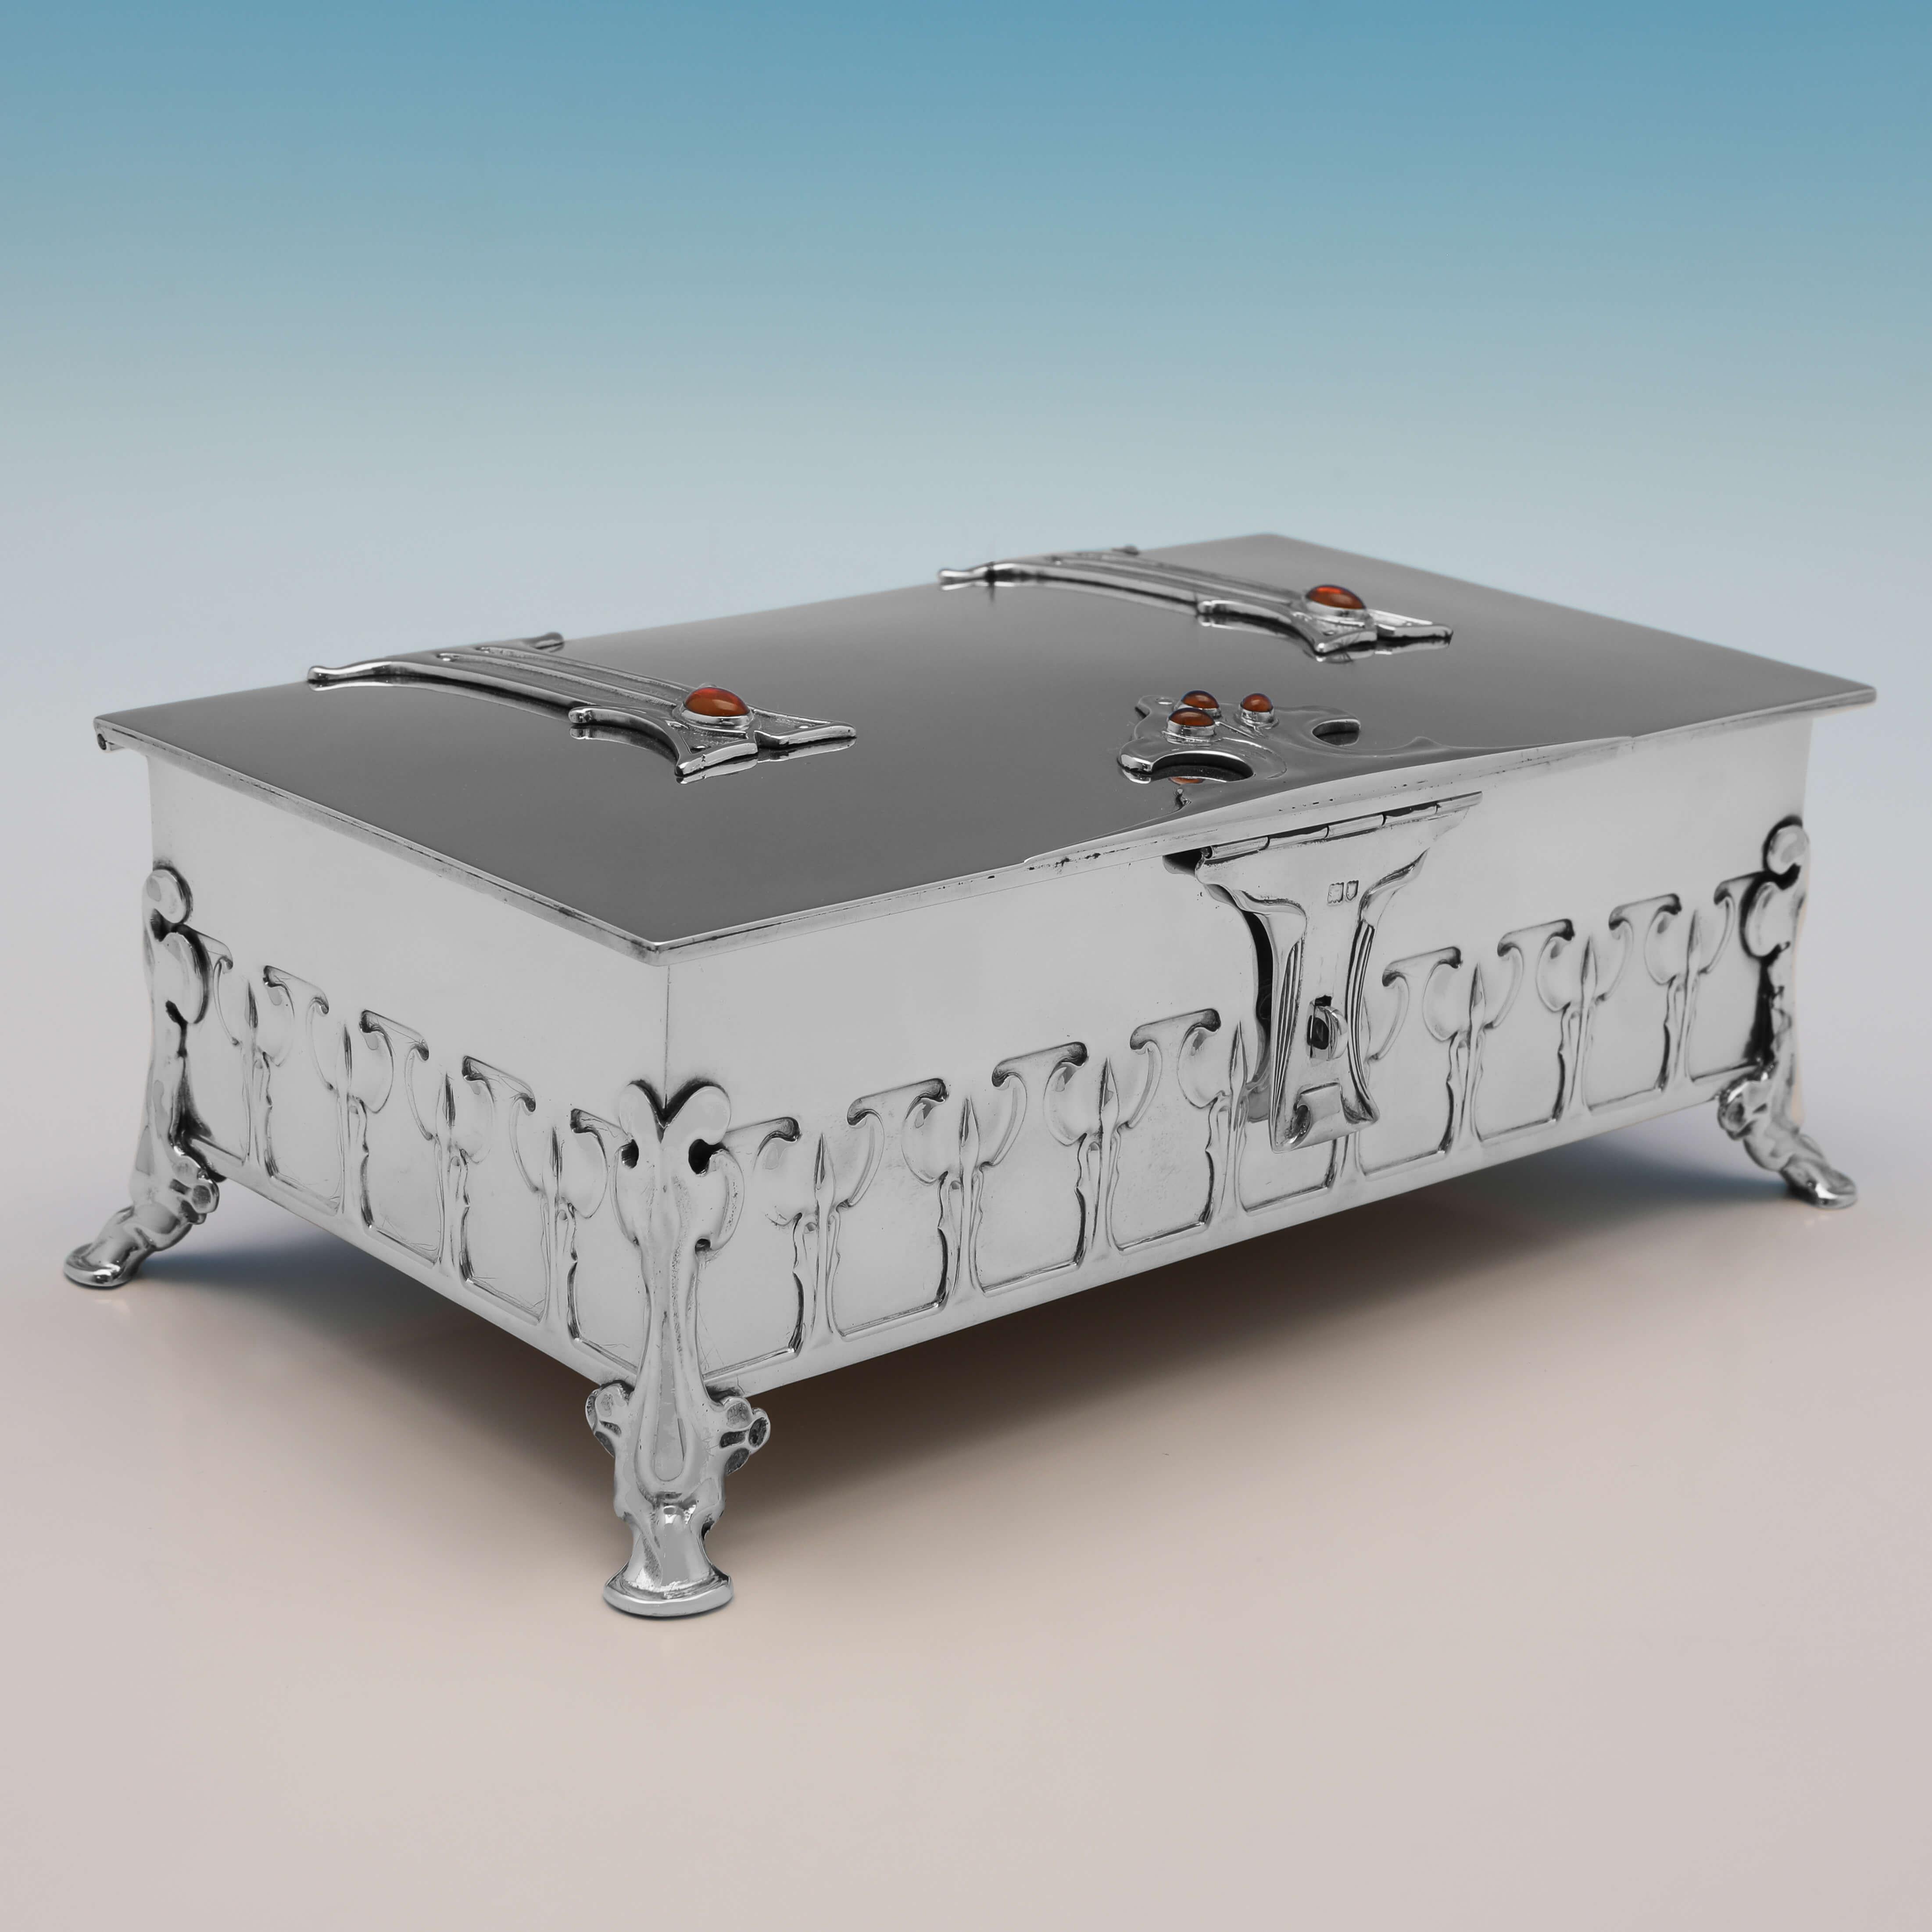 This exceptional Arts & Crafts period sterling silver casket, or box, carries hallmarks for London in 1901 by William Hutton & Sons, and was designed by Kate Harris. The casket stands on four feet, and features a repeating embossed floral pattern to